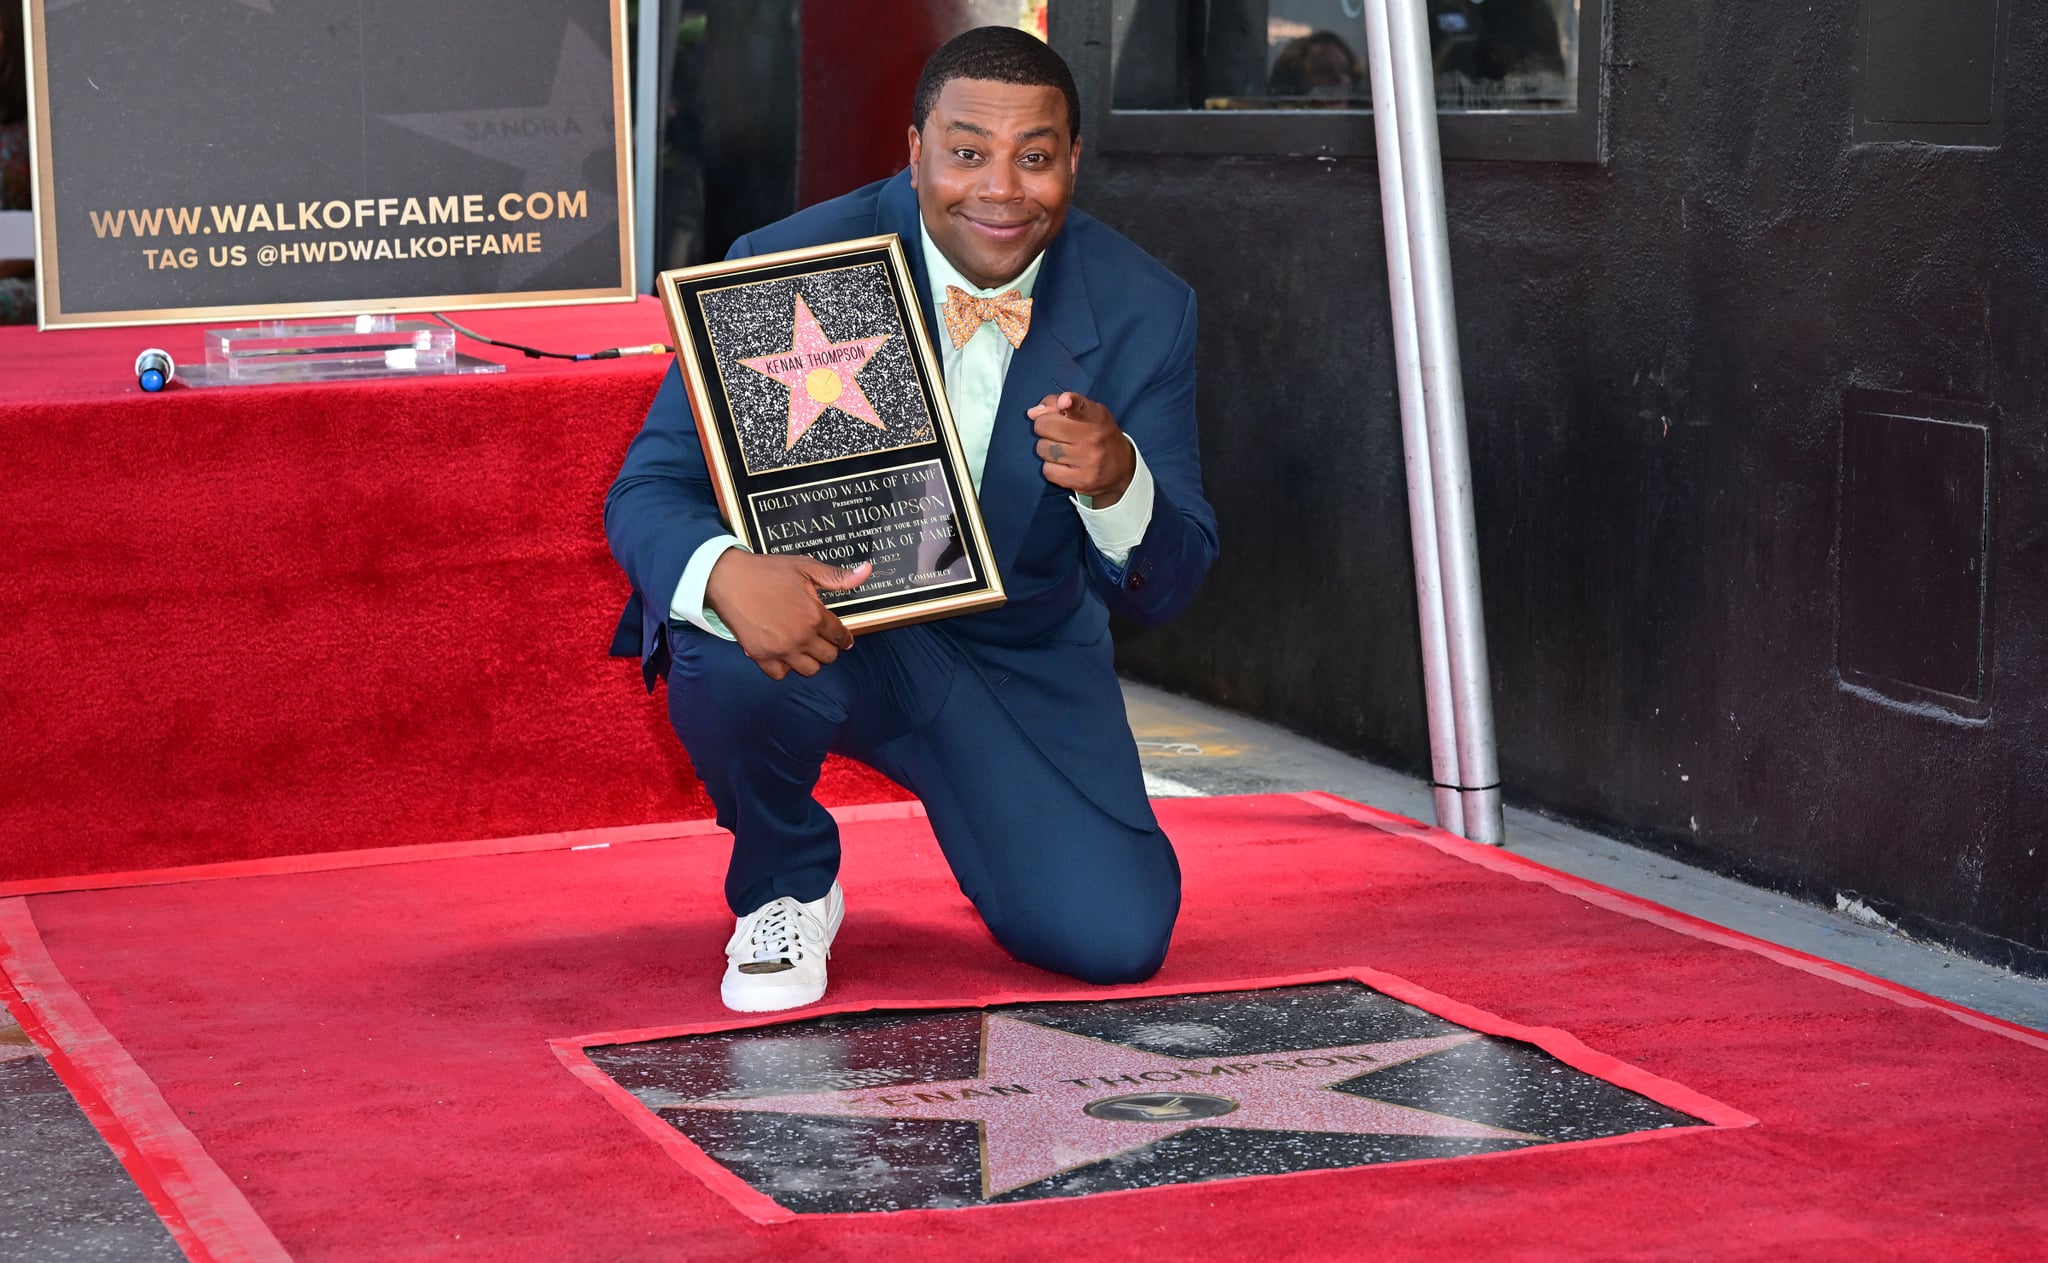 Comedian and actor Kenan Thompson poses on his just unveiled Hollywood Walk of Fame Star on August 11, 2022 in Hollywood, California. - Thompson's distinction will make him the 2,728th star in the Hollywood Walk of Fames television category. (Photo by Frederic J. BROWN / AFP) (Photo by FREDERIC J. BROWN/AFP via Getty Images)